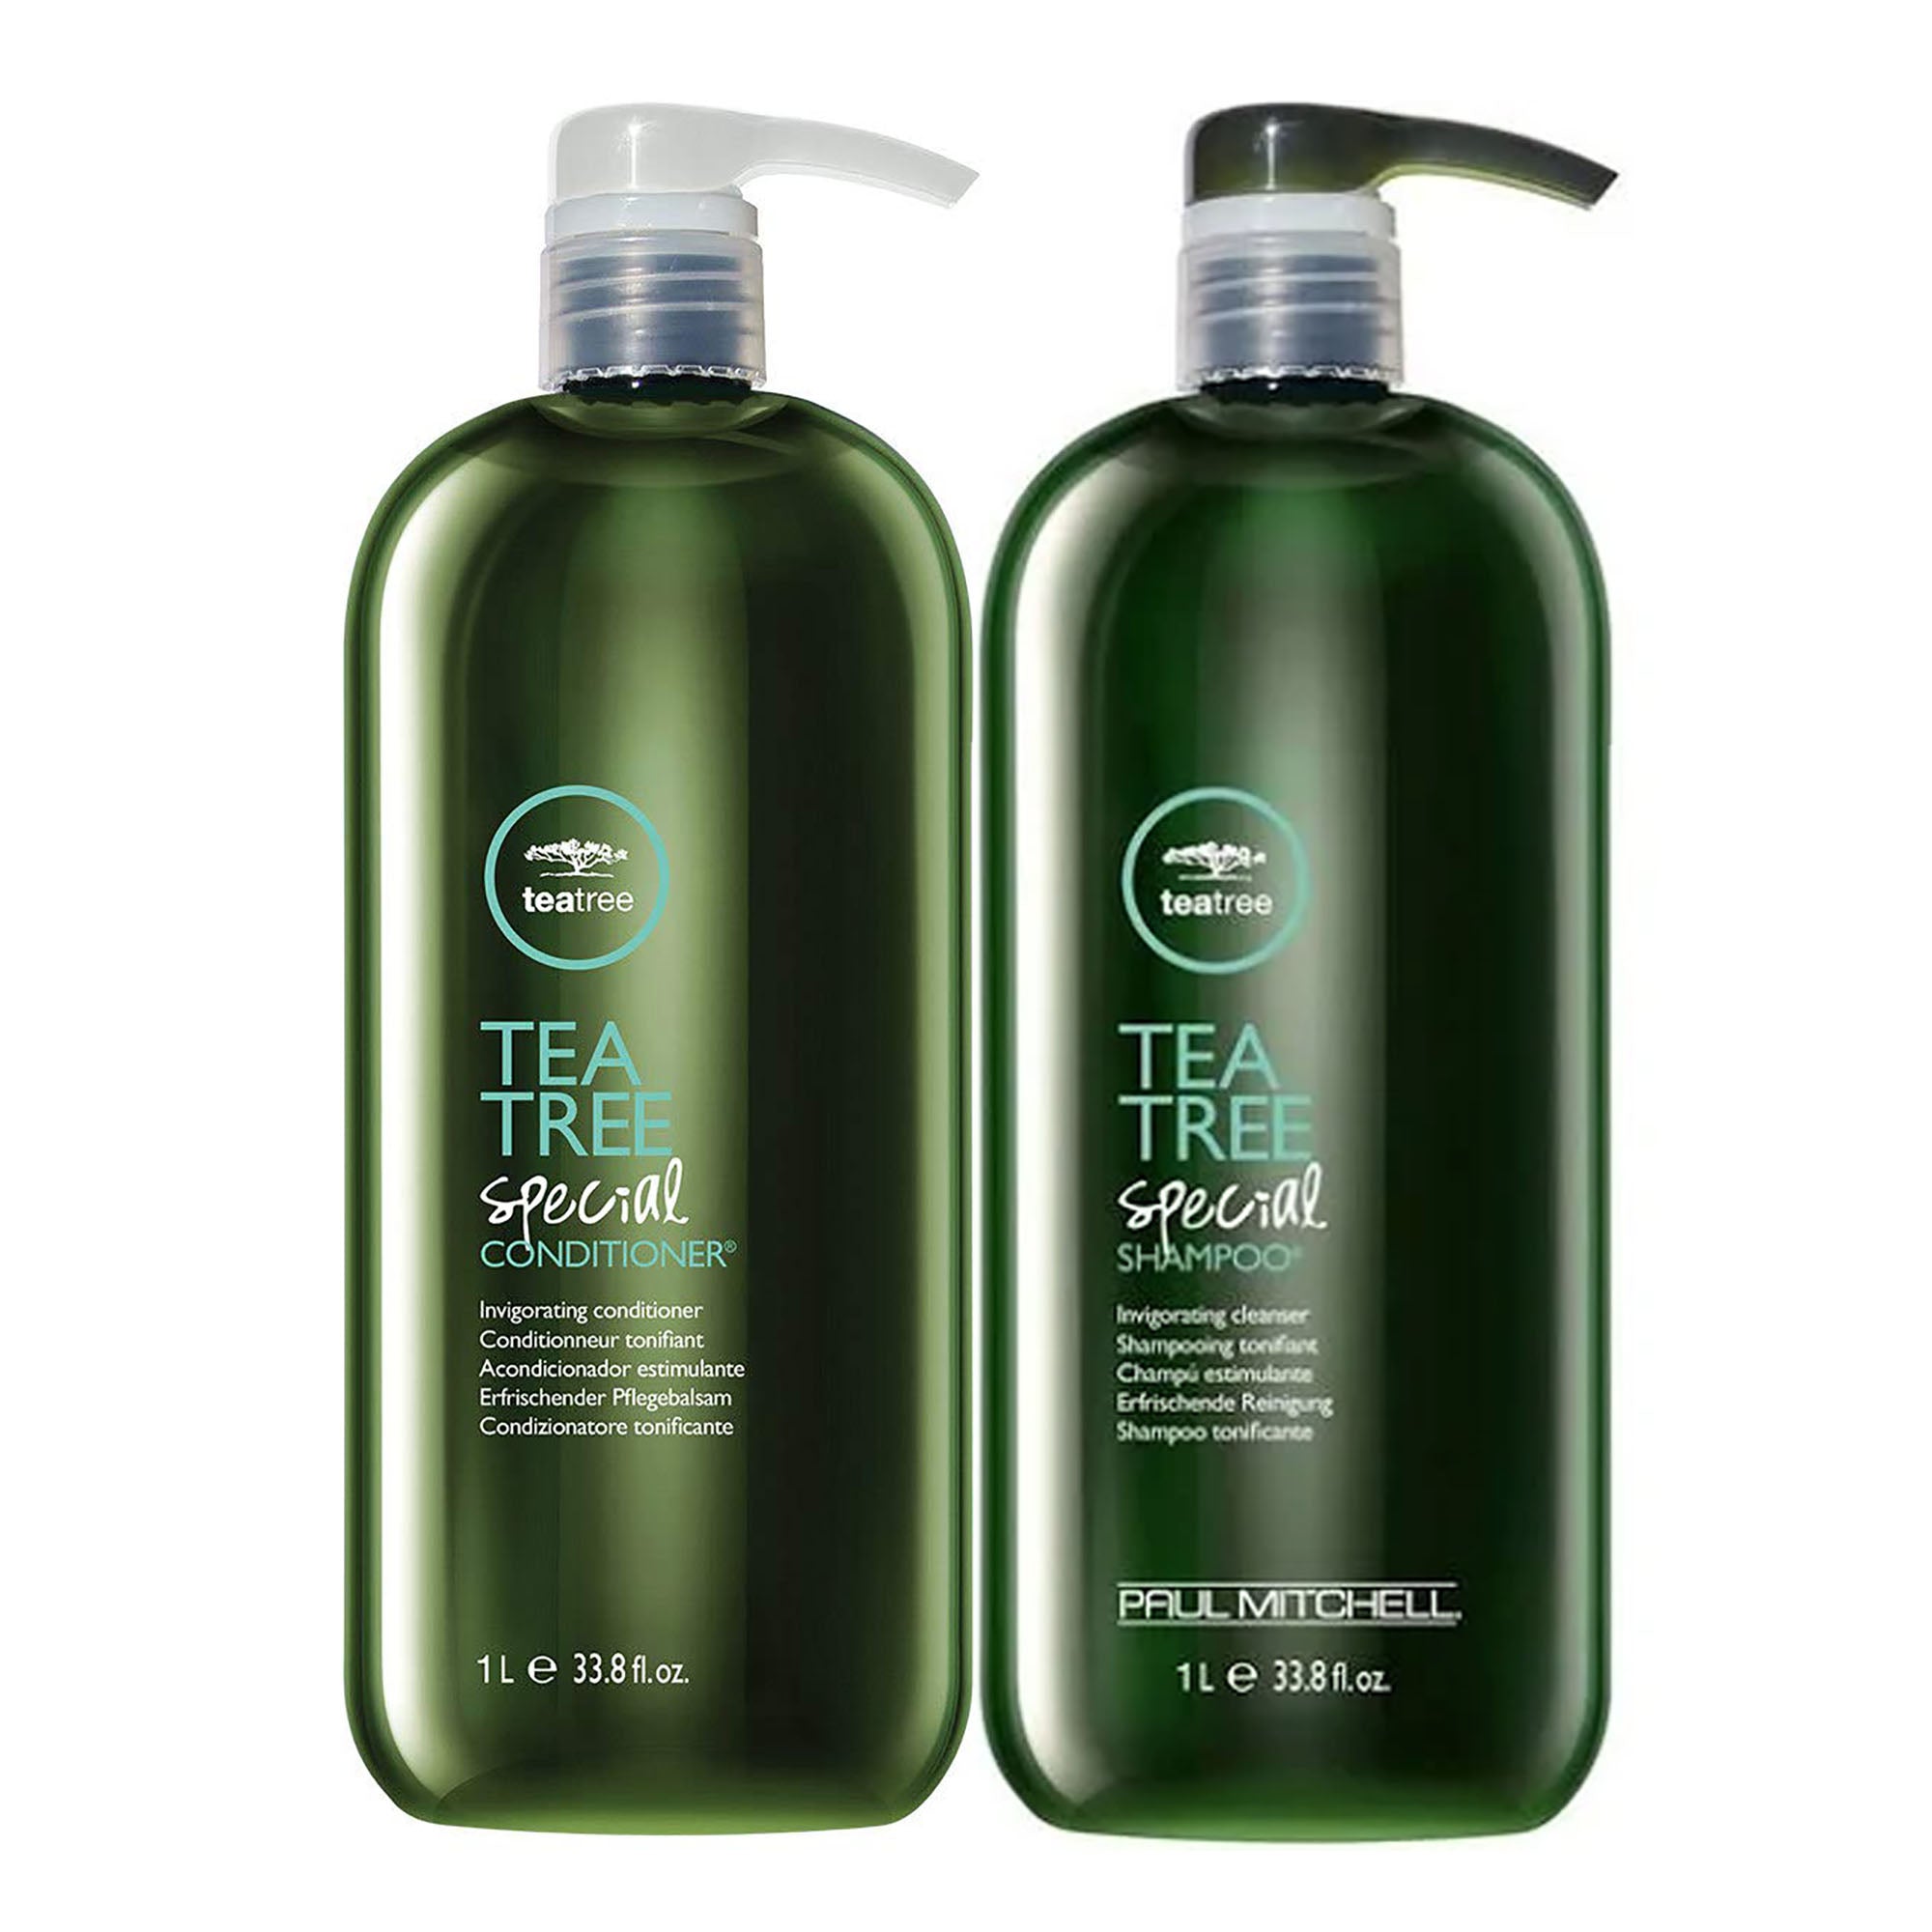 Paul Mitchell Tea Tree - Special Shampoo & Conditioner  Duo Liter (discounts don't apply to this item) ($93 Value) / LITER